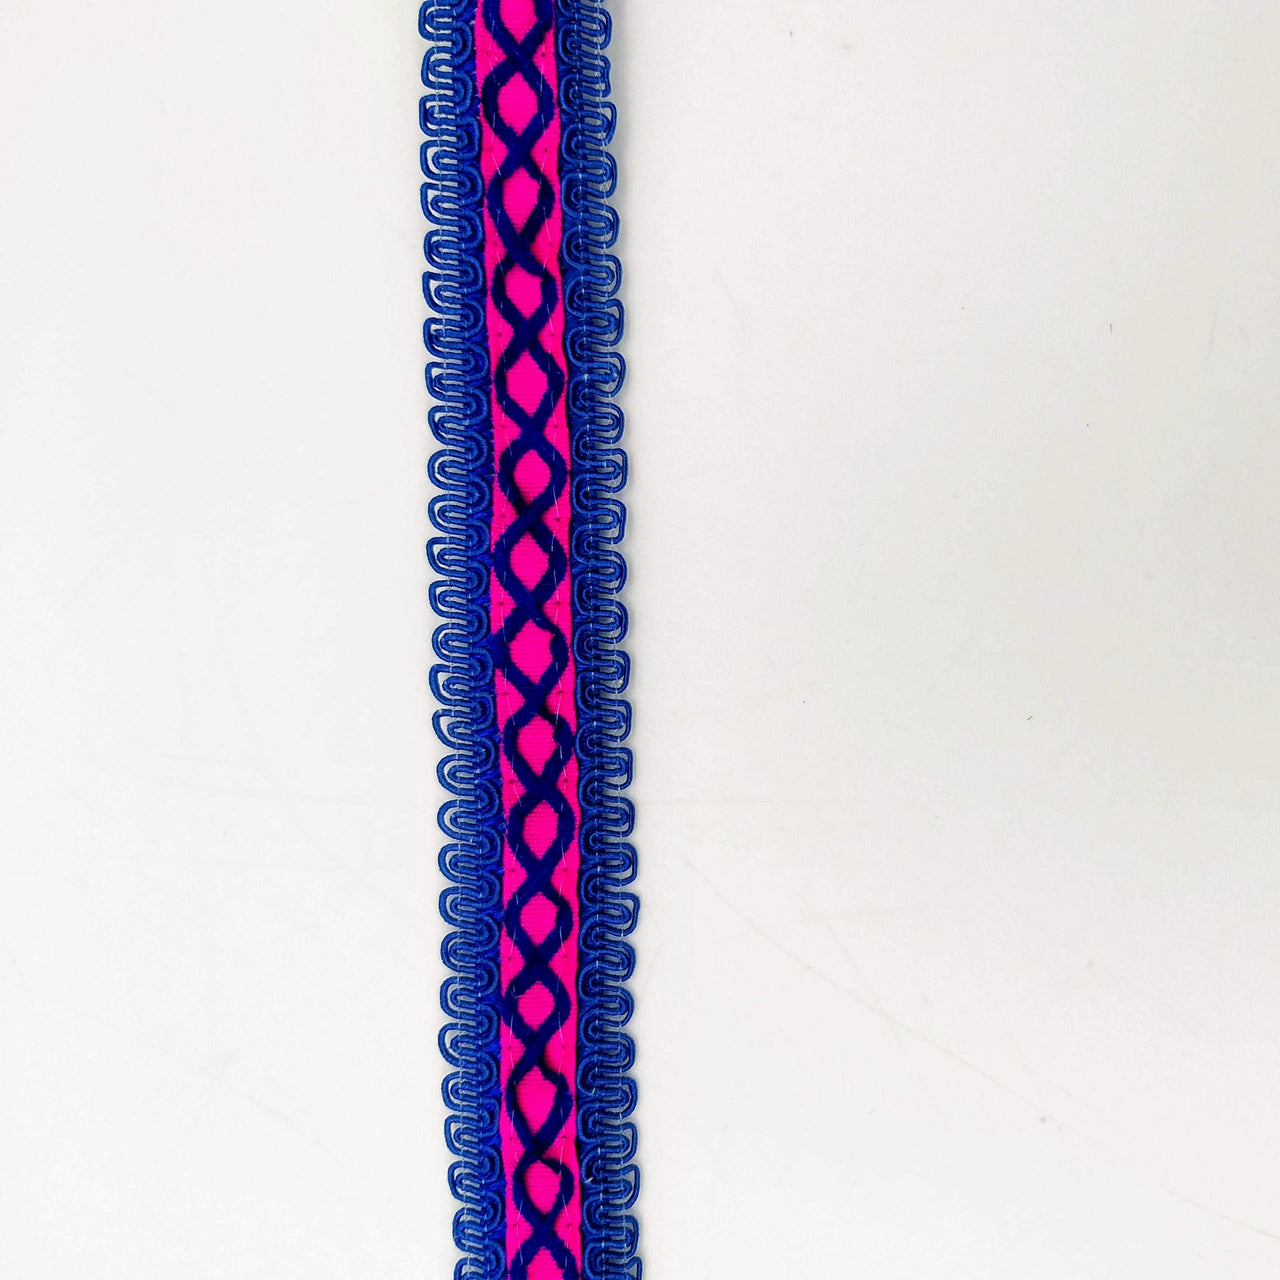 Fuchsia Pink Cotton Fabric Lace Trim with Royal Blue Thread Embroidery, Trim By 3 Yards, Craft Decorative Ribbon